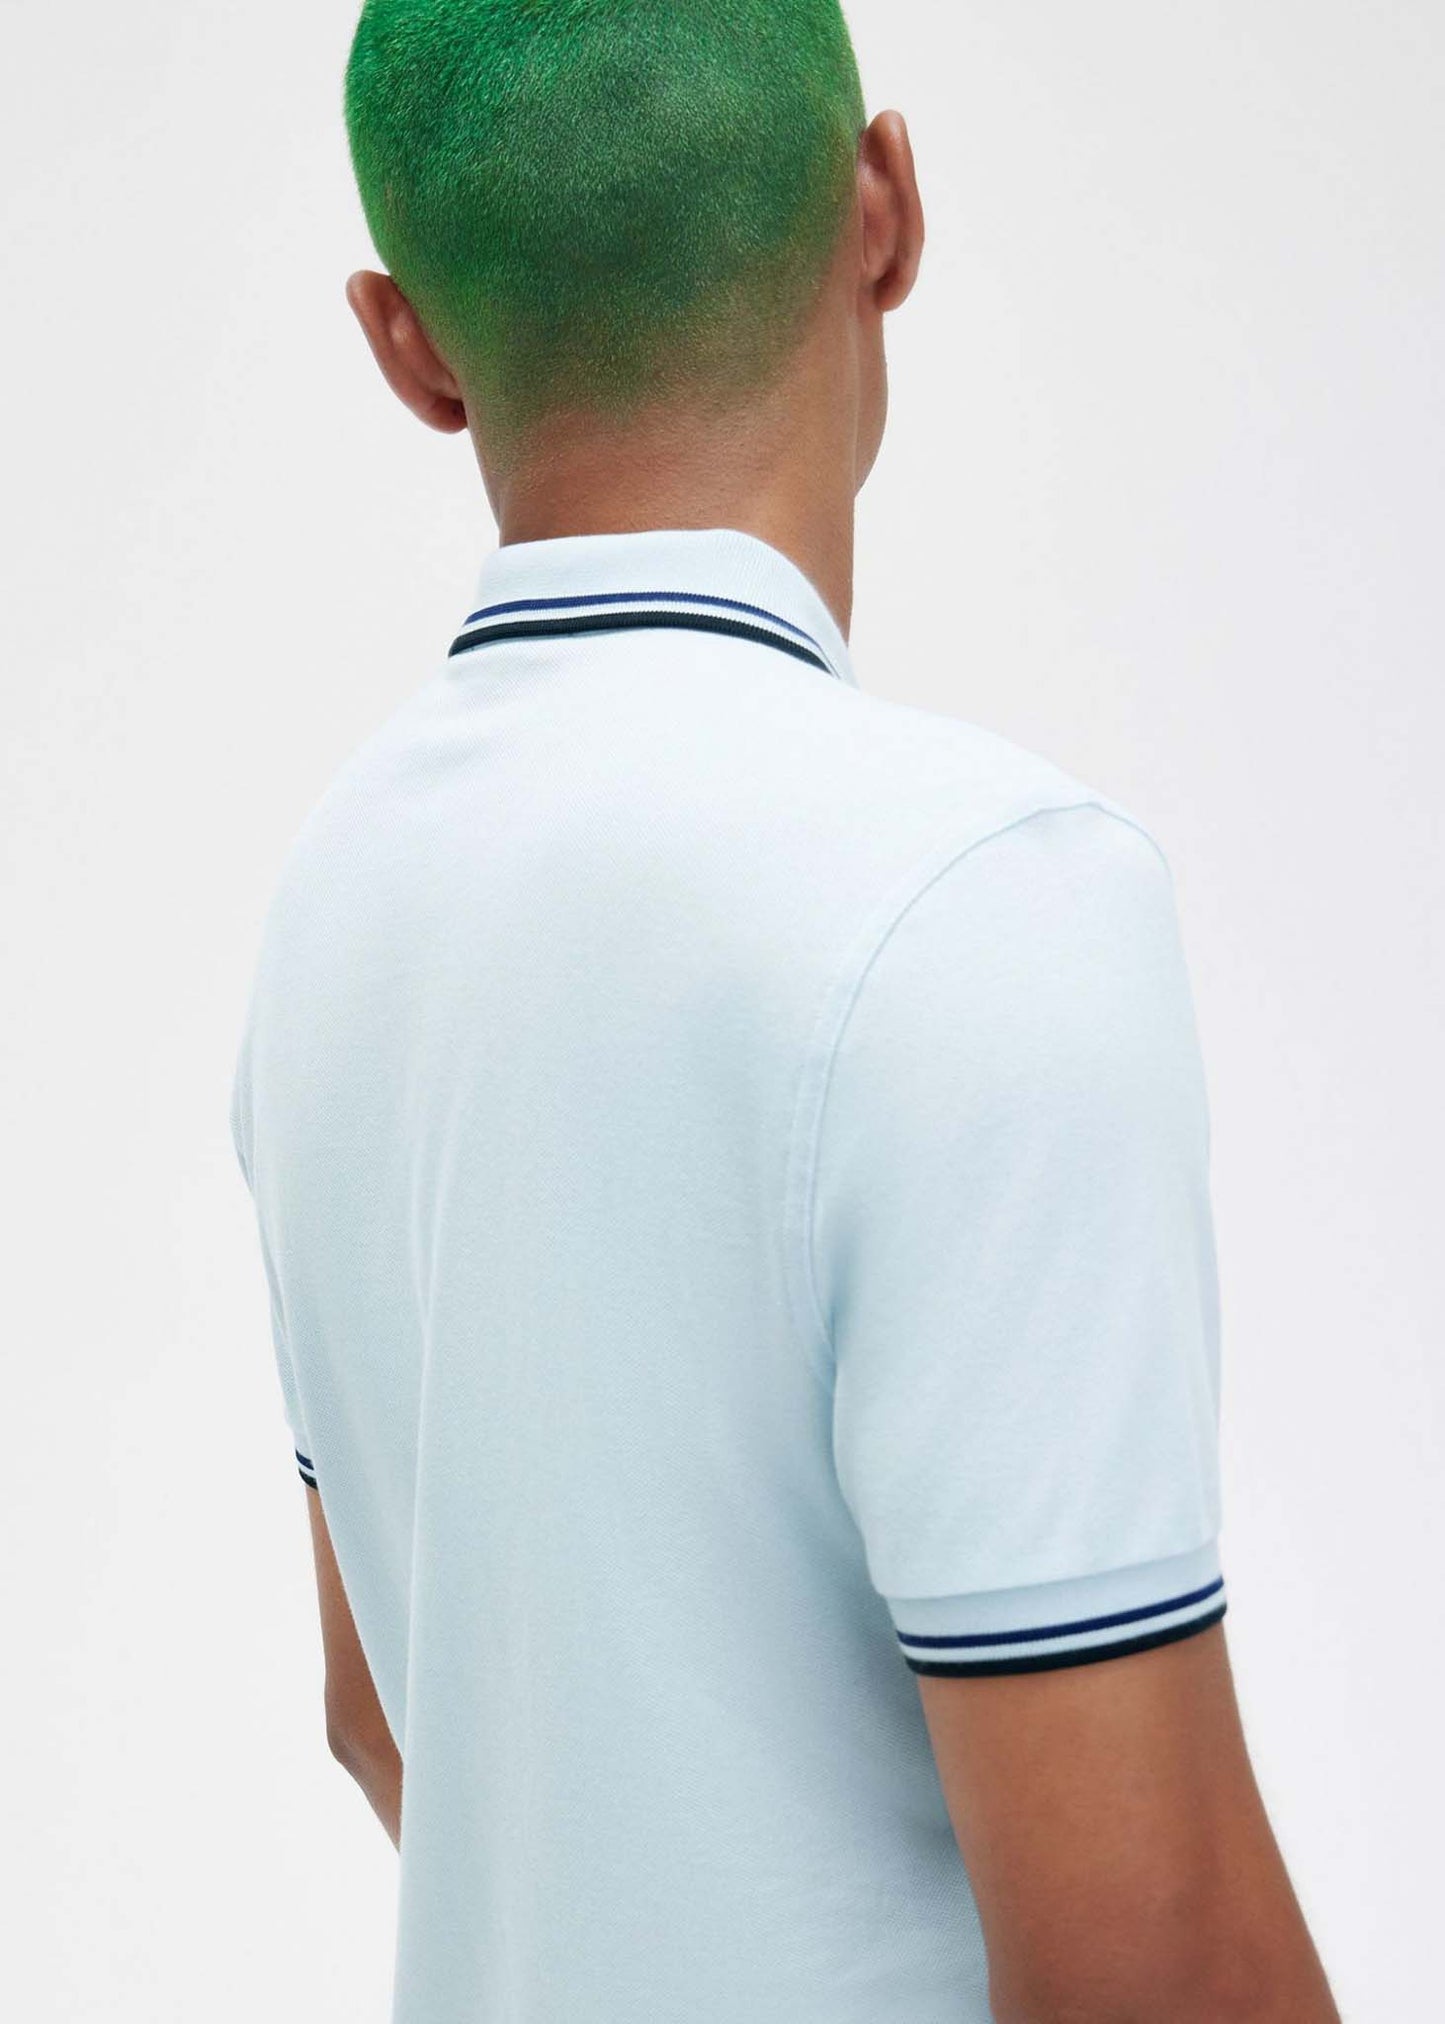 Twin tipped fred perry shirt - light ice